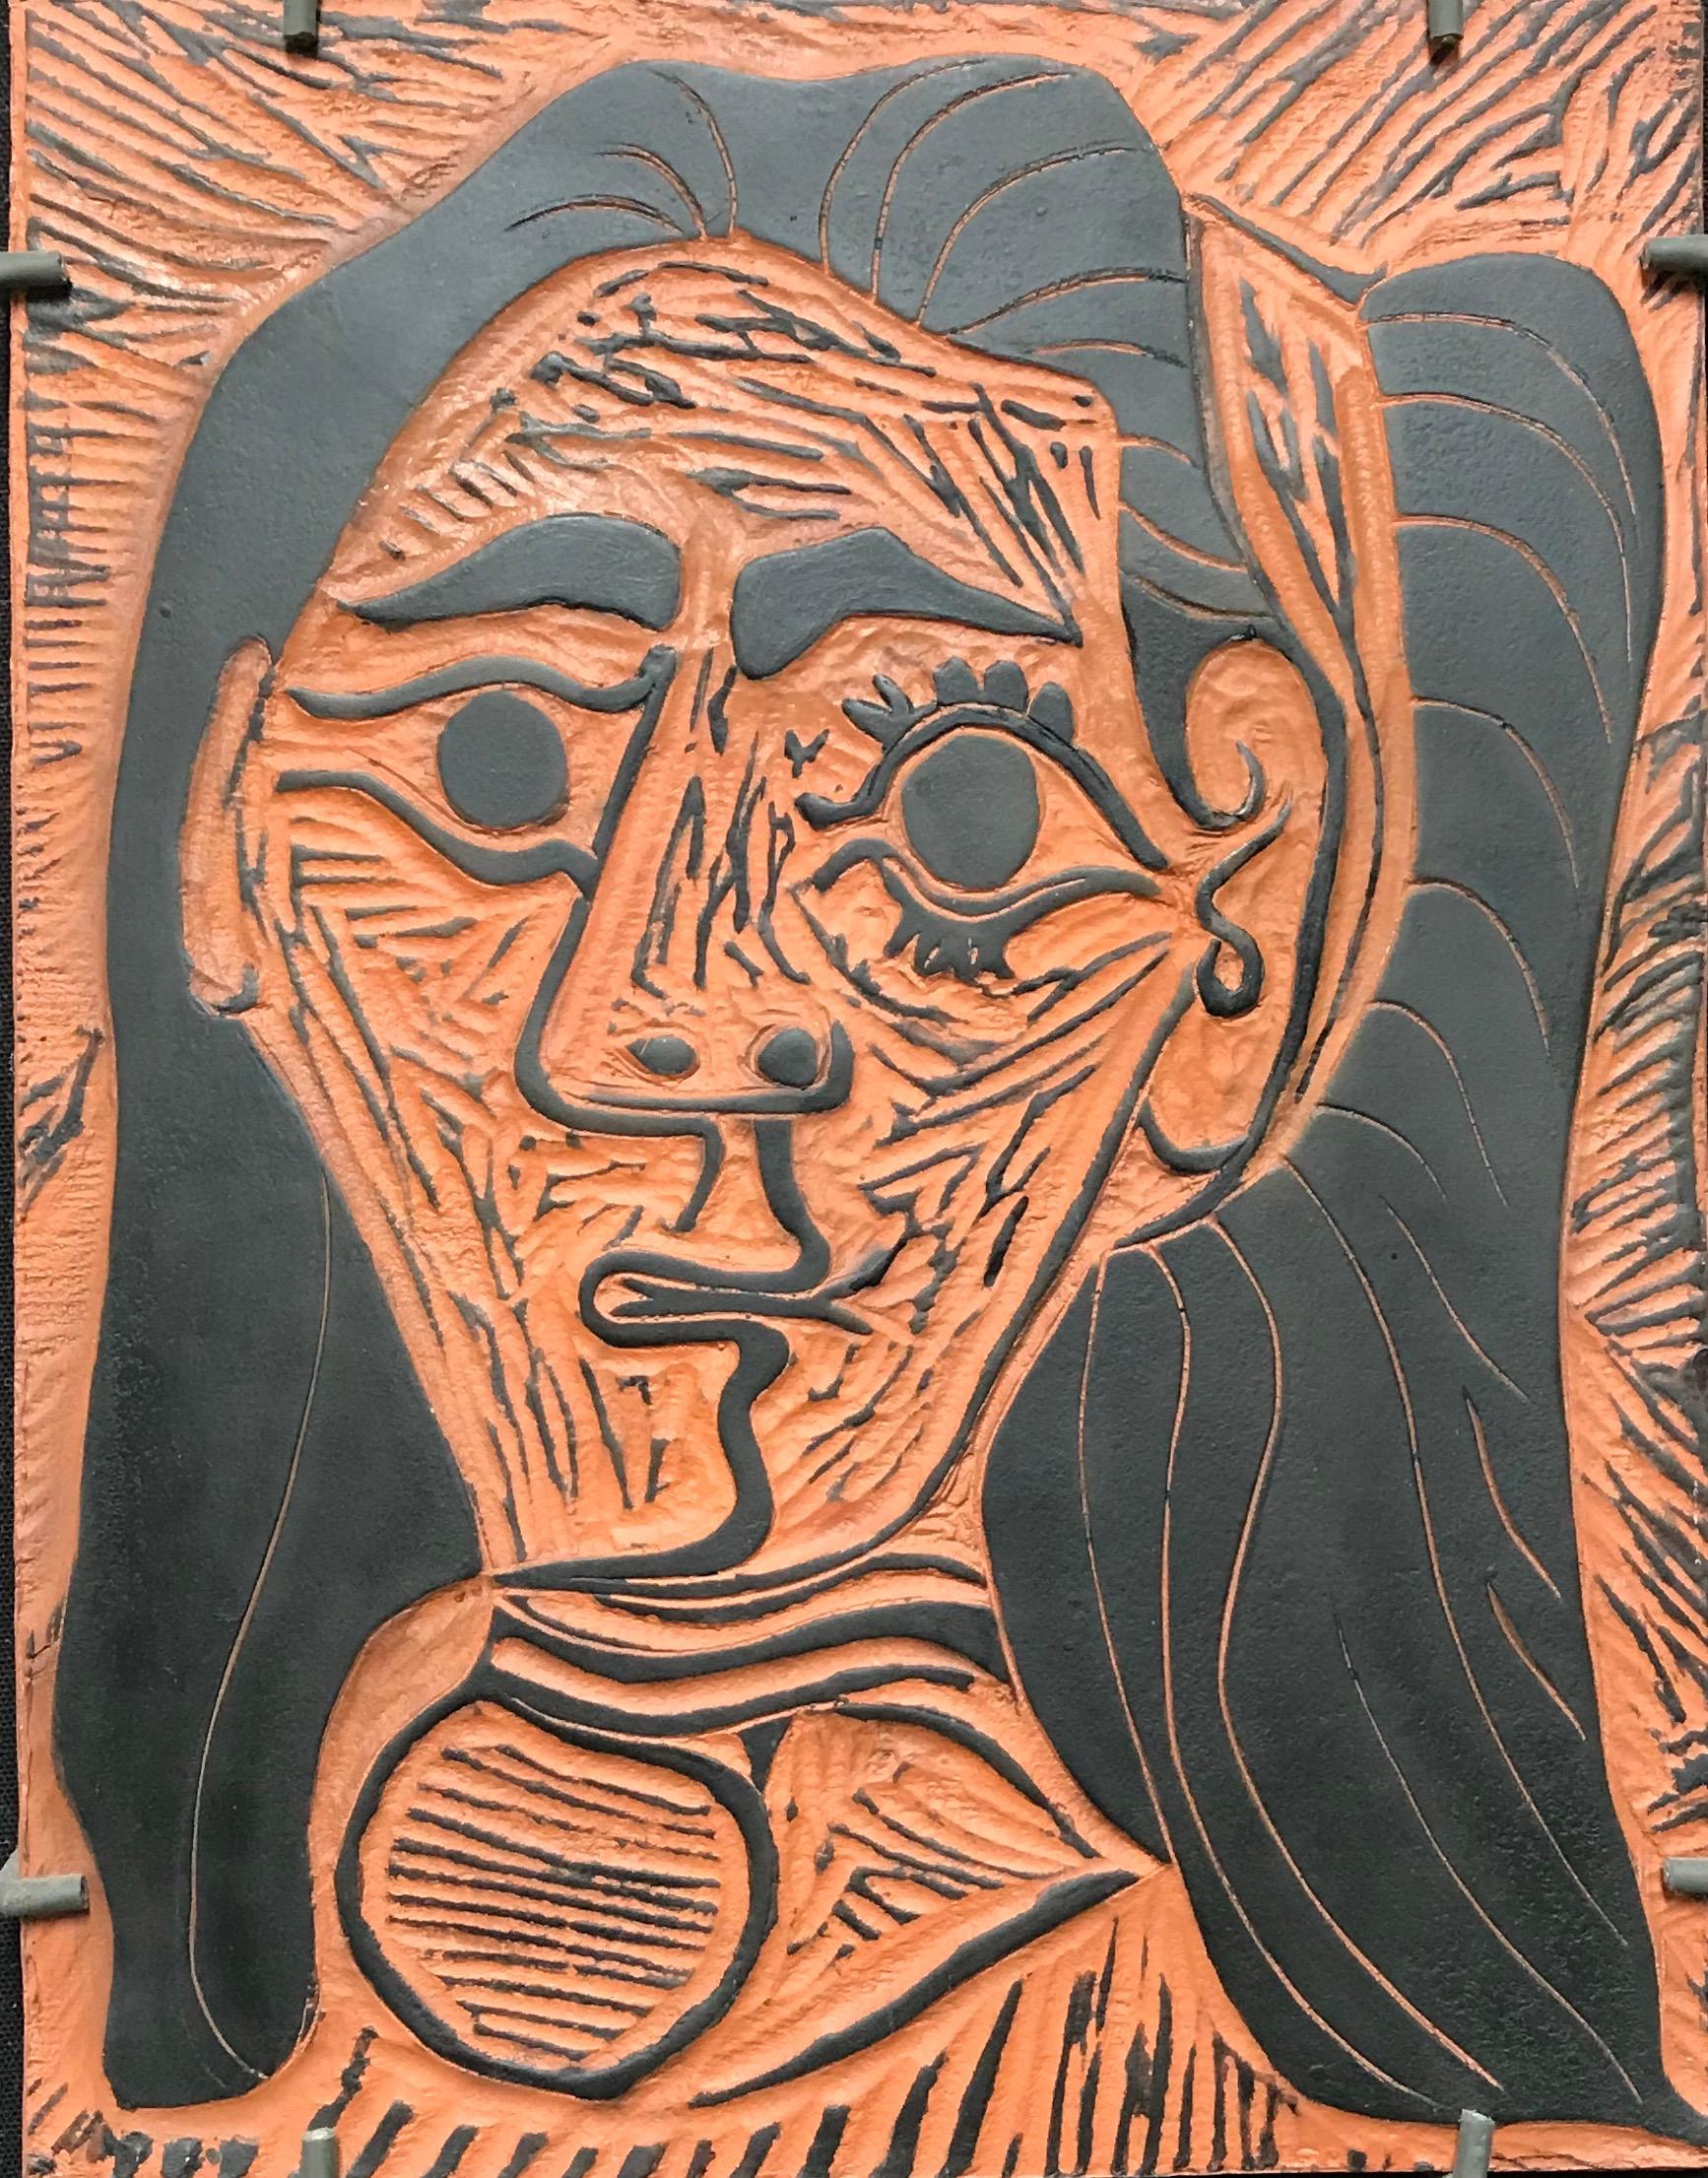 Pablo Picasso, Fluffy-haired Woman, clay plaque